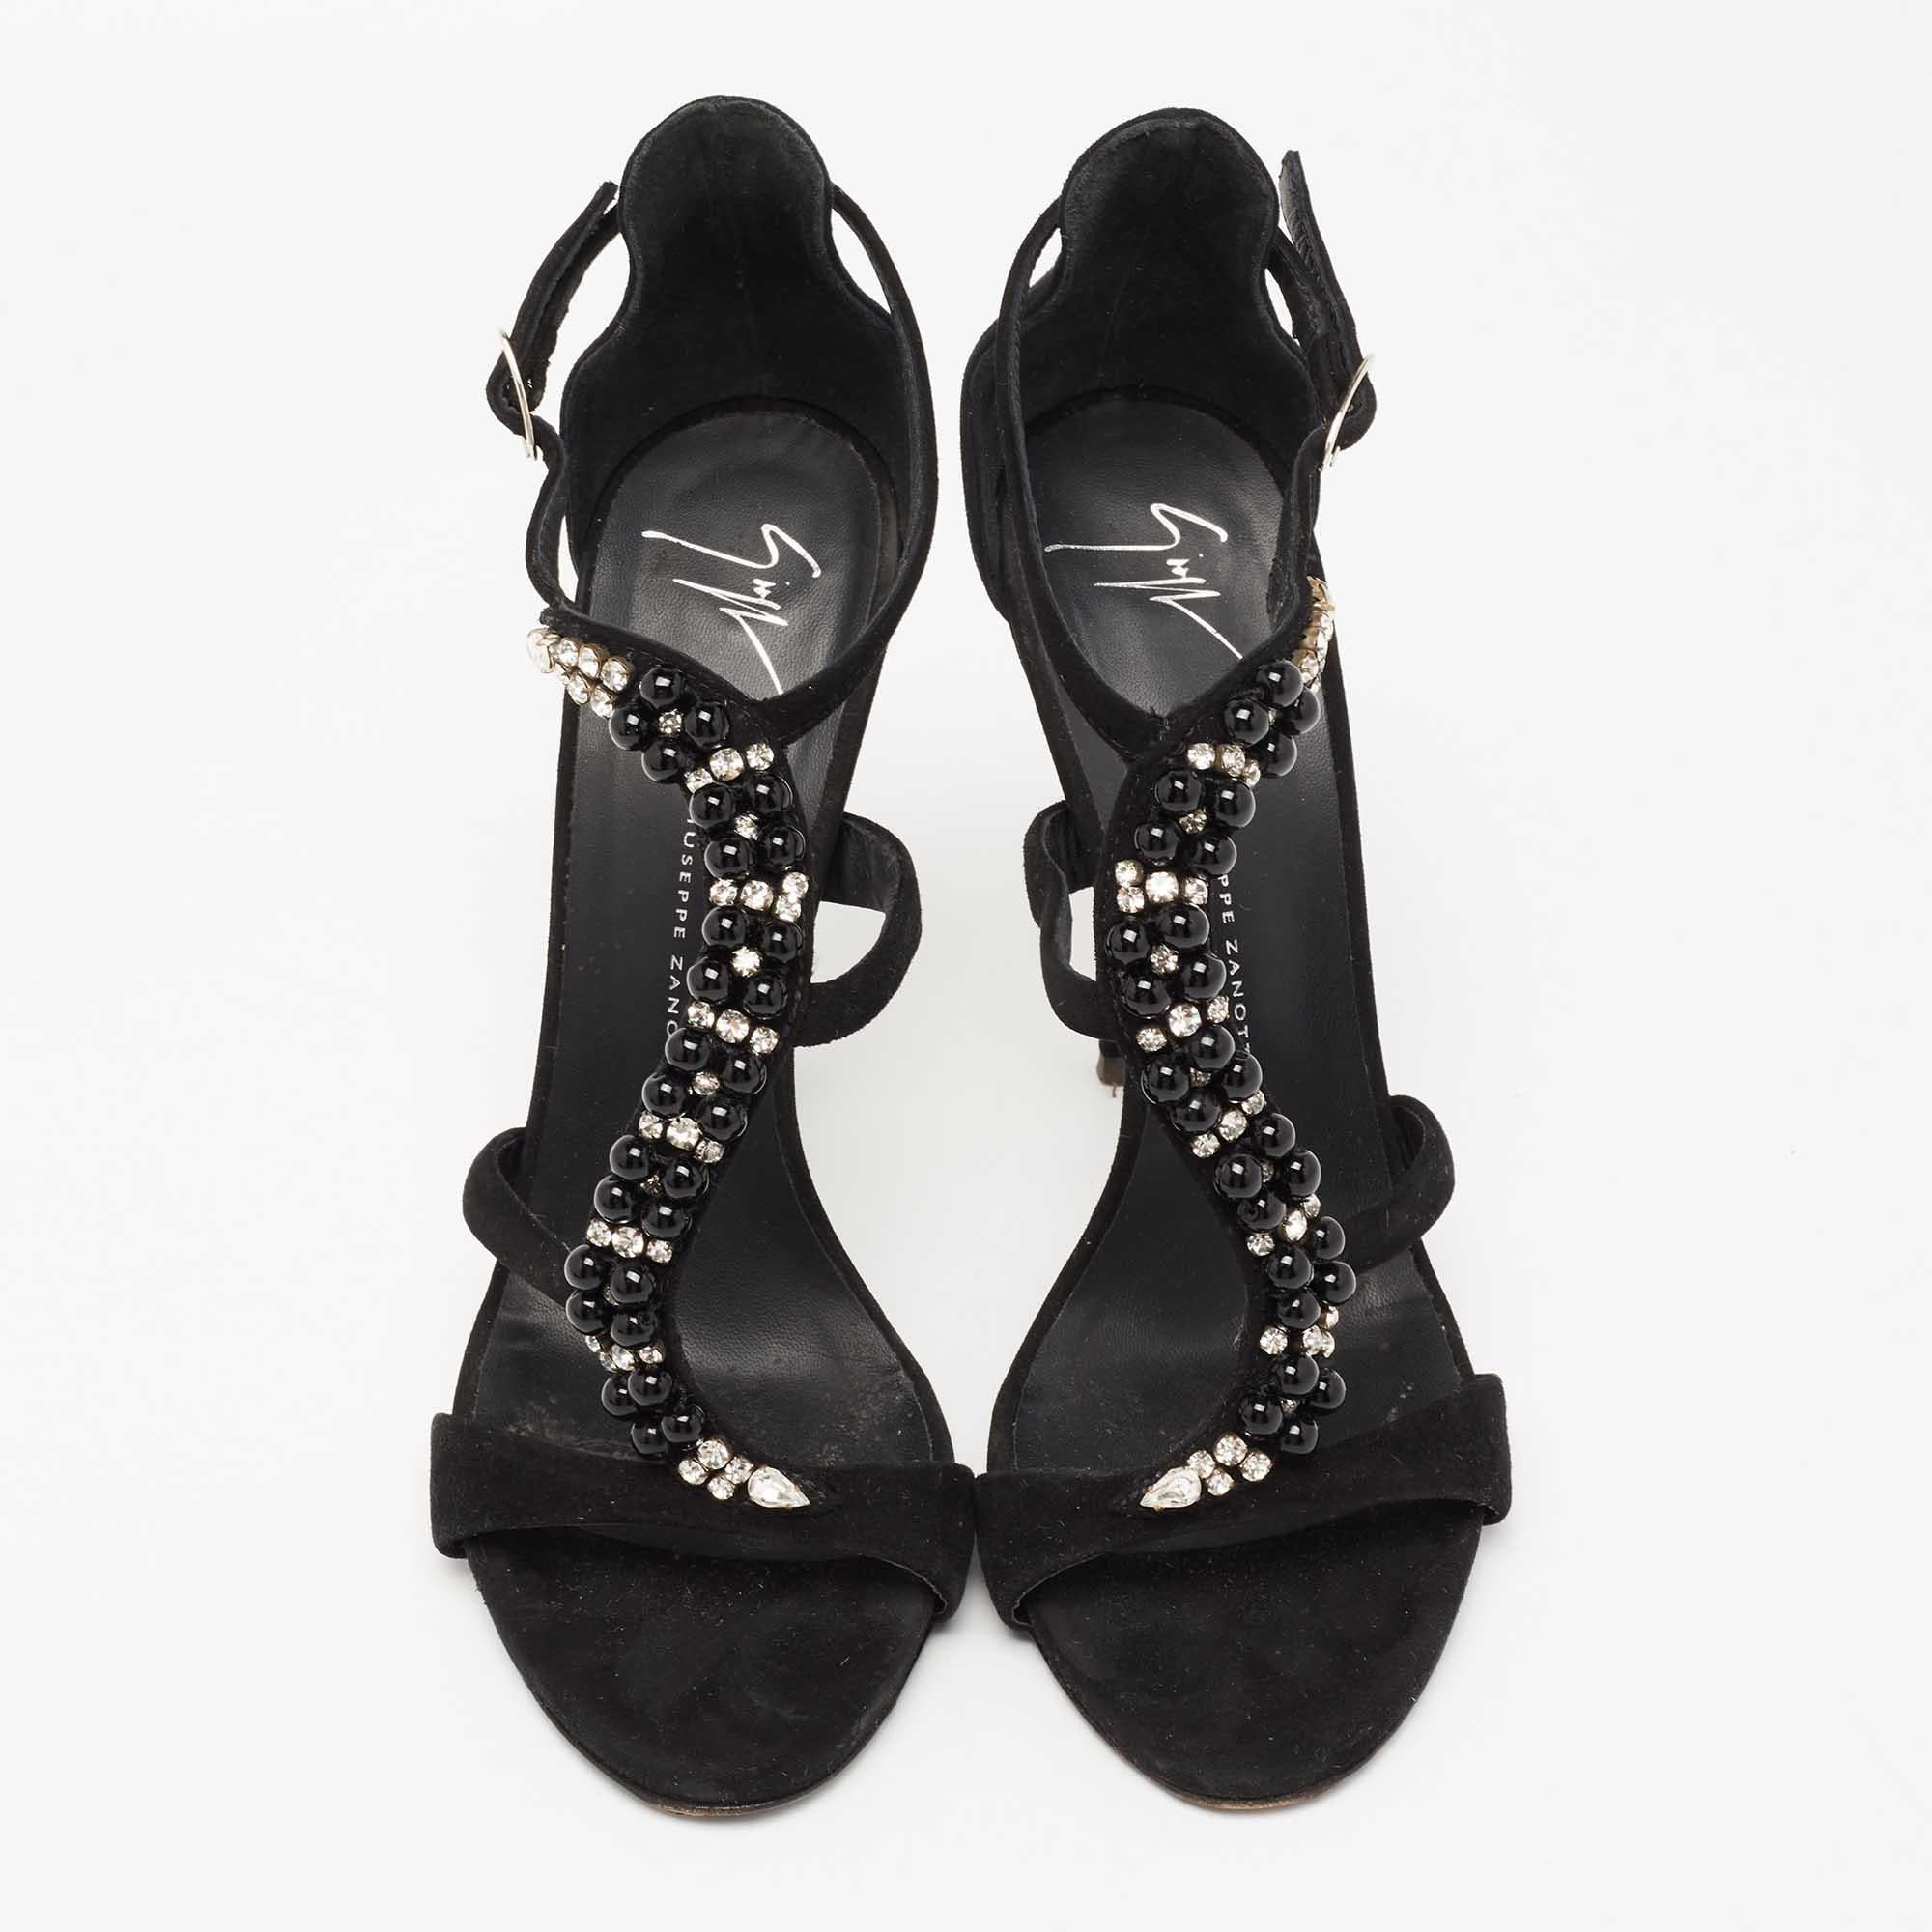 Giuseppe Zanotti Black Suede Crystal Embellished T-Strap Sandals Size 39 In Good Condition For Sale In Dubai, Al Qouz 2